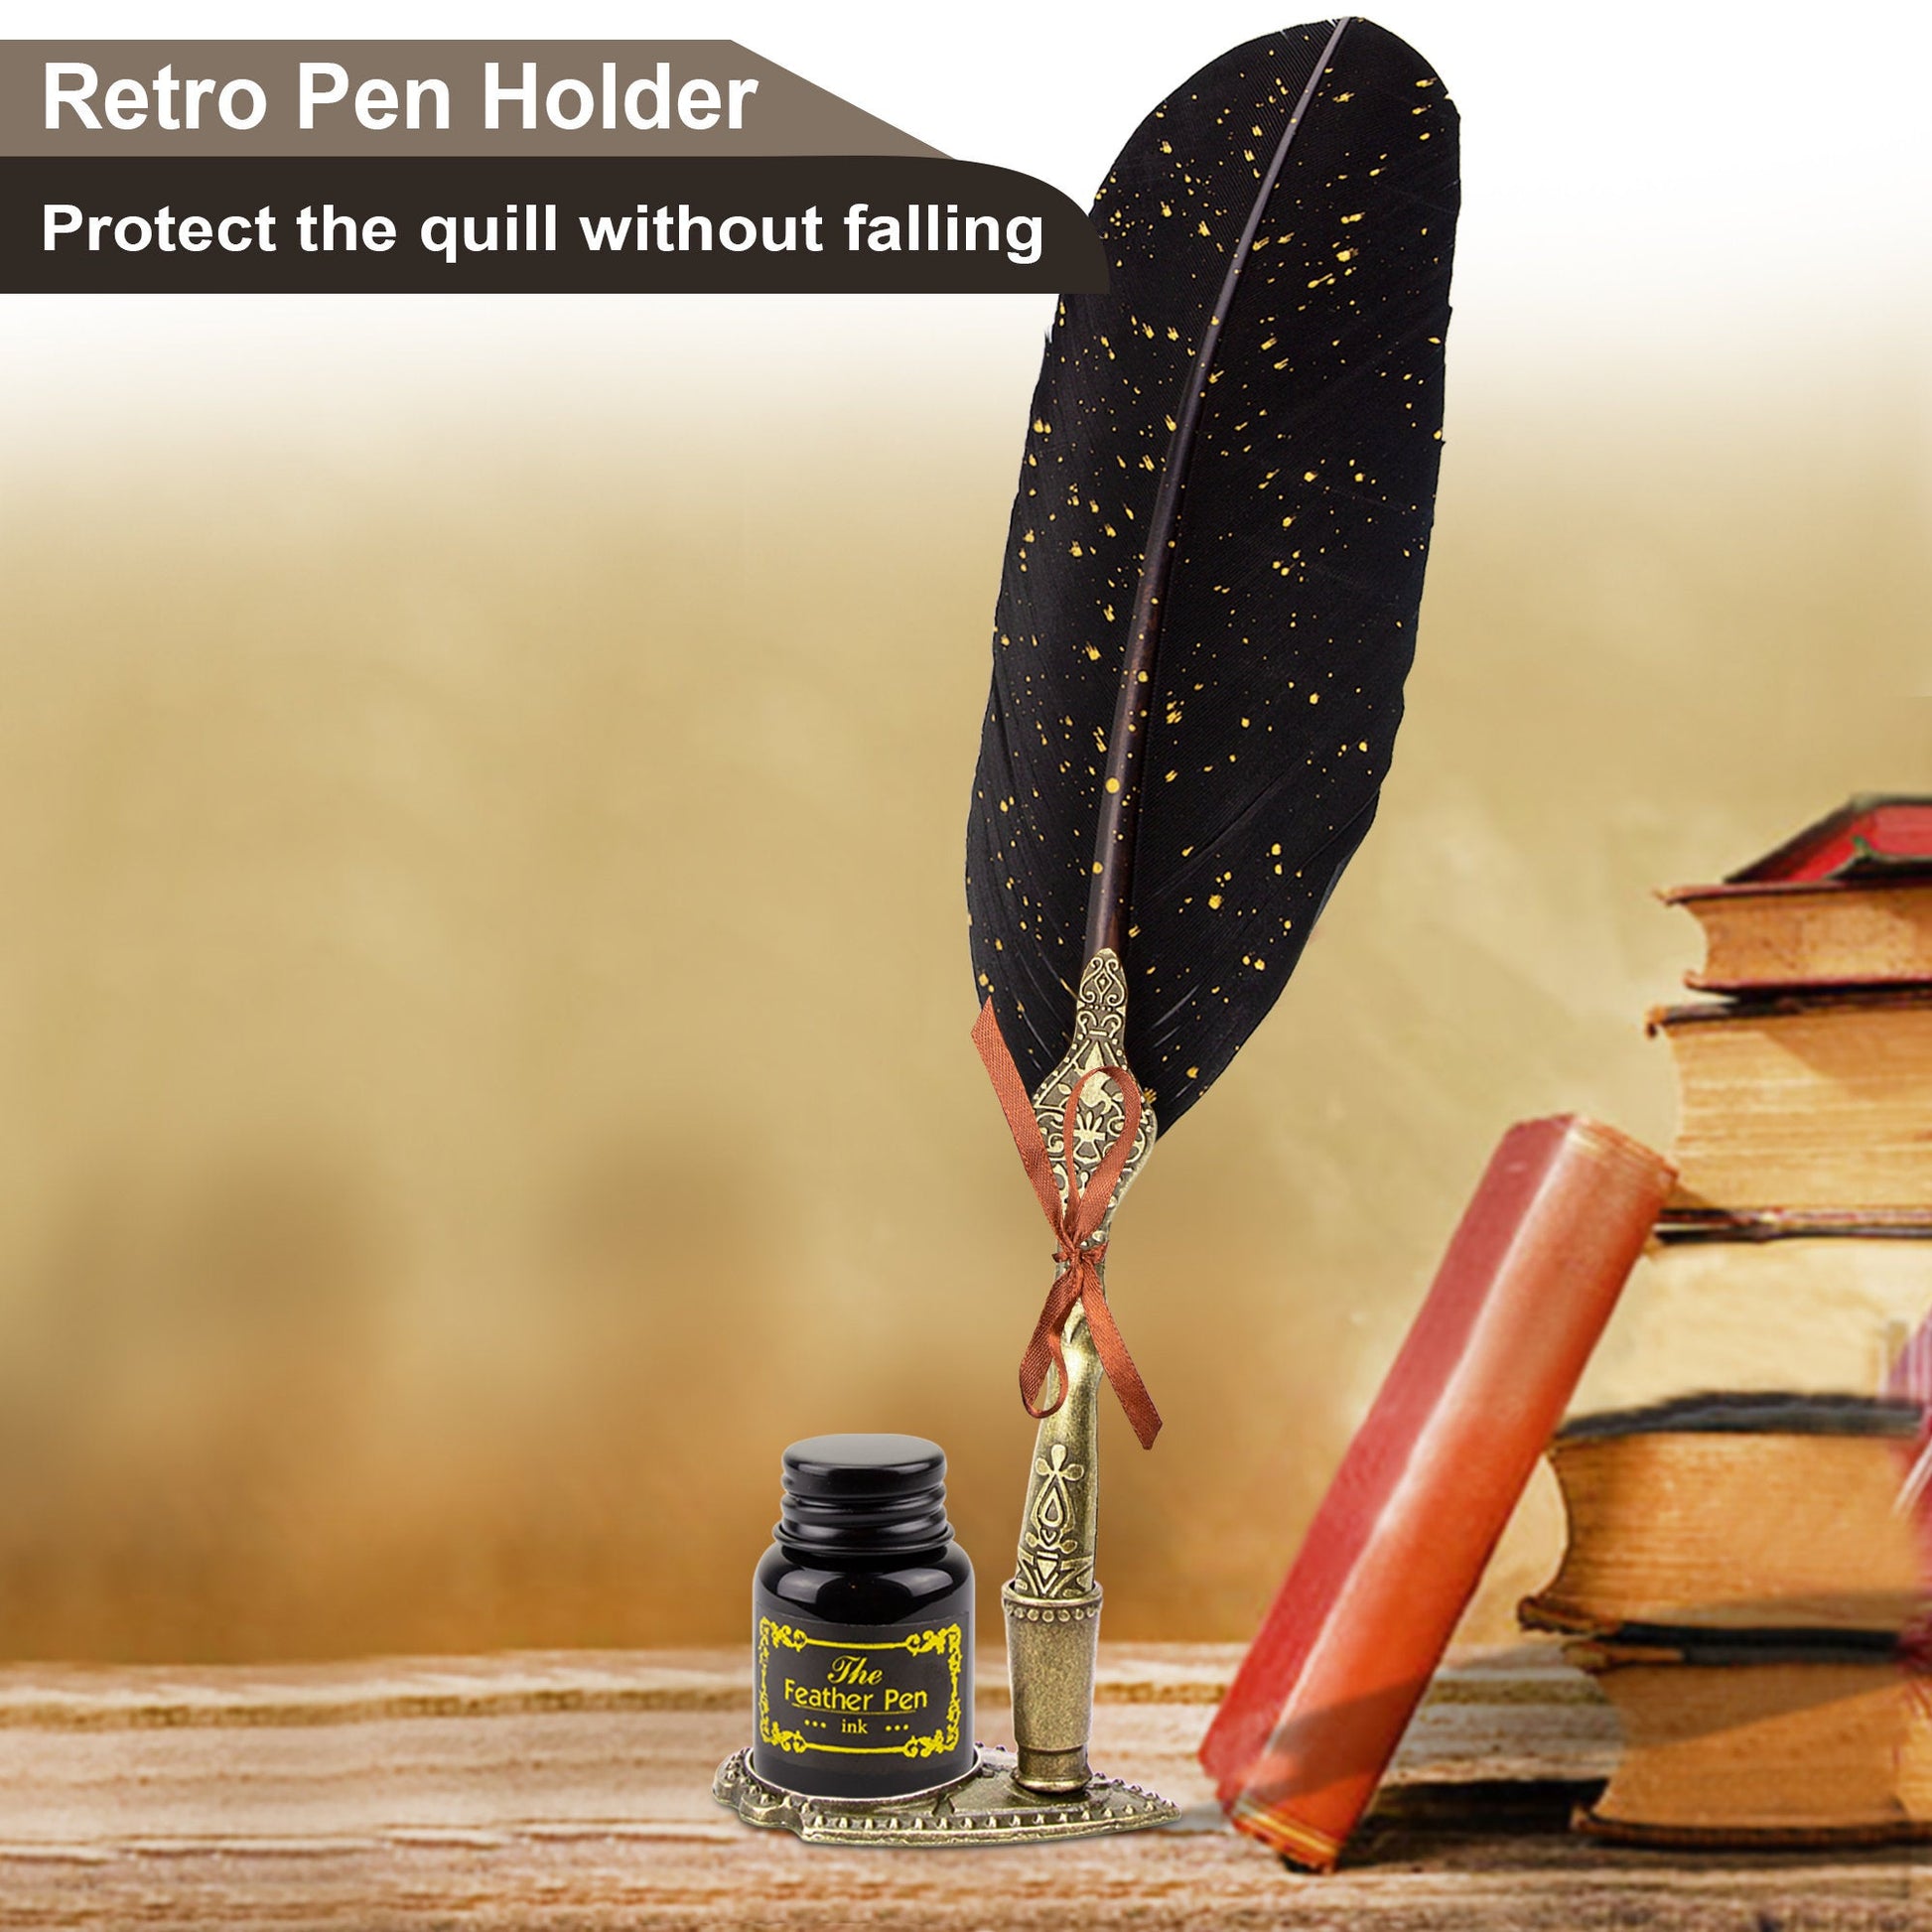 Trustela's Quill Pen And Ink Set - Includes Feather Pen Antique, Dip Pen  Stand, Calligraphy Nibs And Black Ink Well In A Gift Box